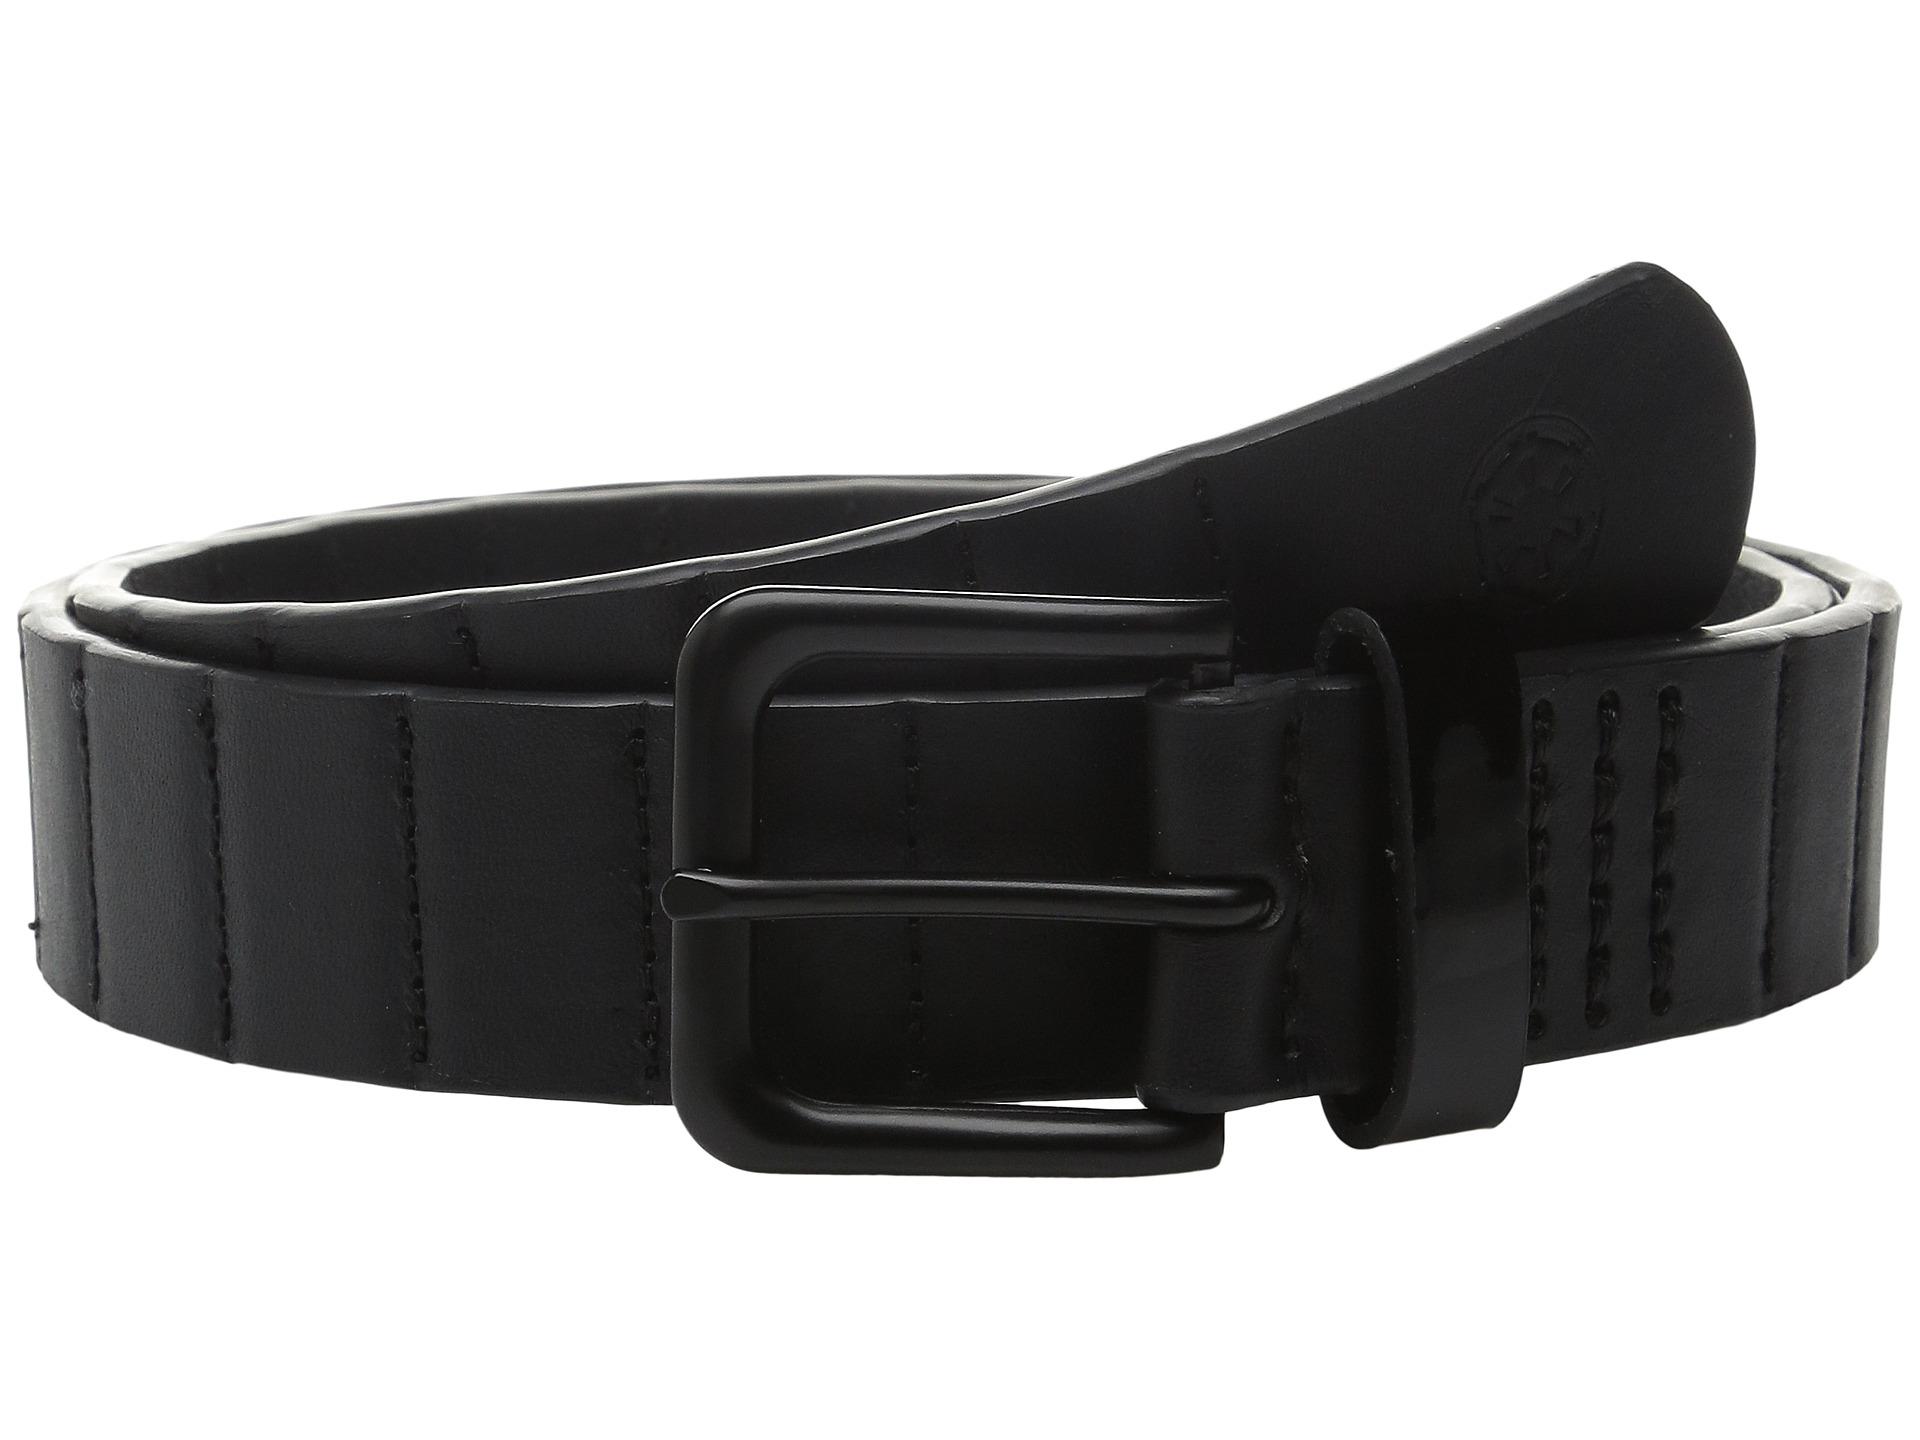 Lyst - Nixon The Dna Belt - The Star Wars Collection in Black for Men